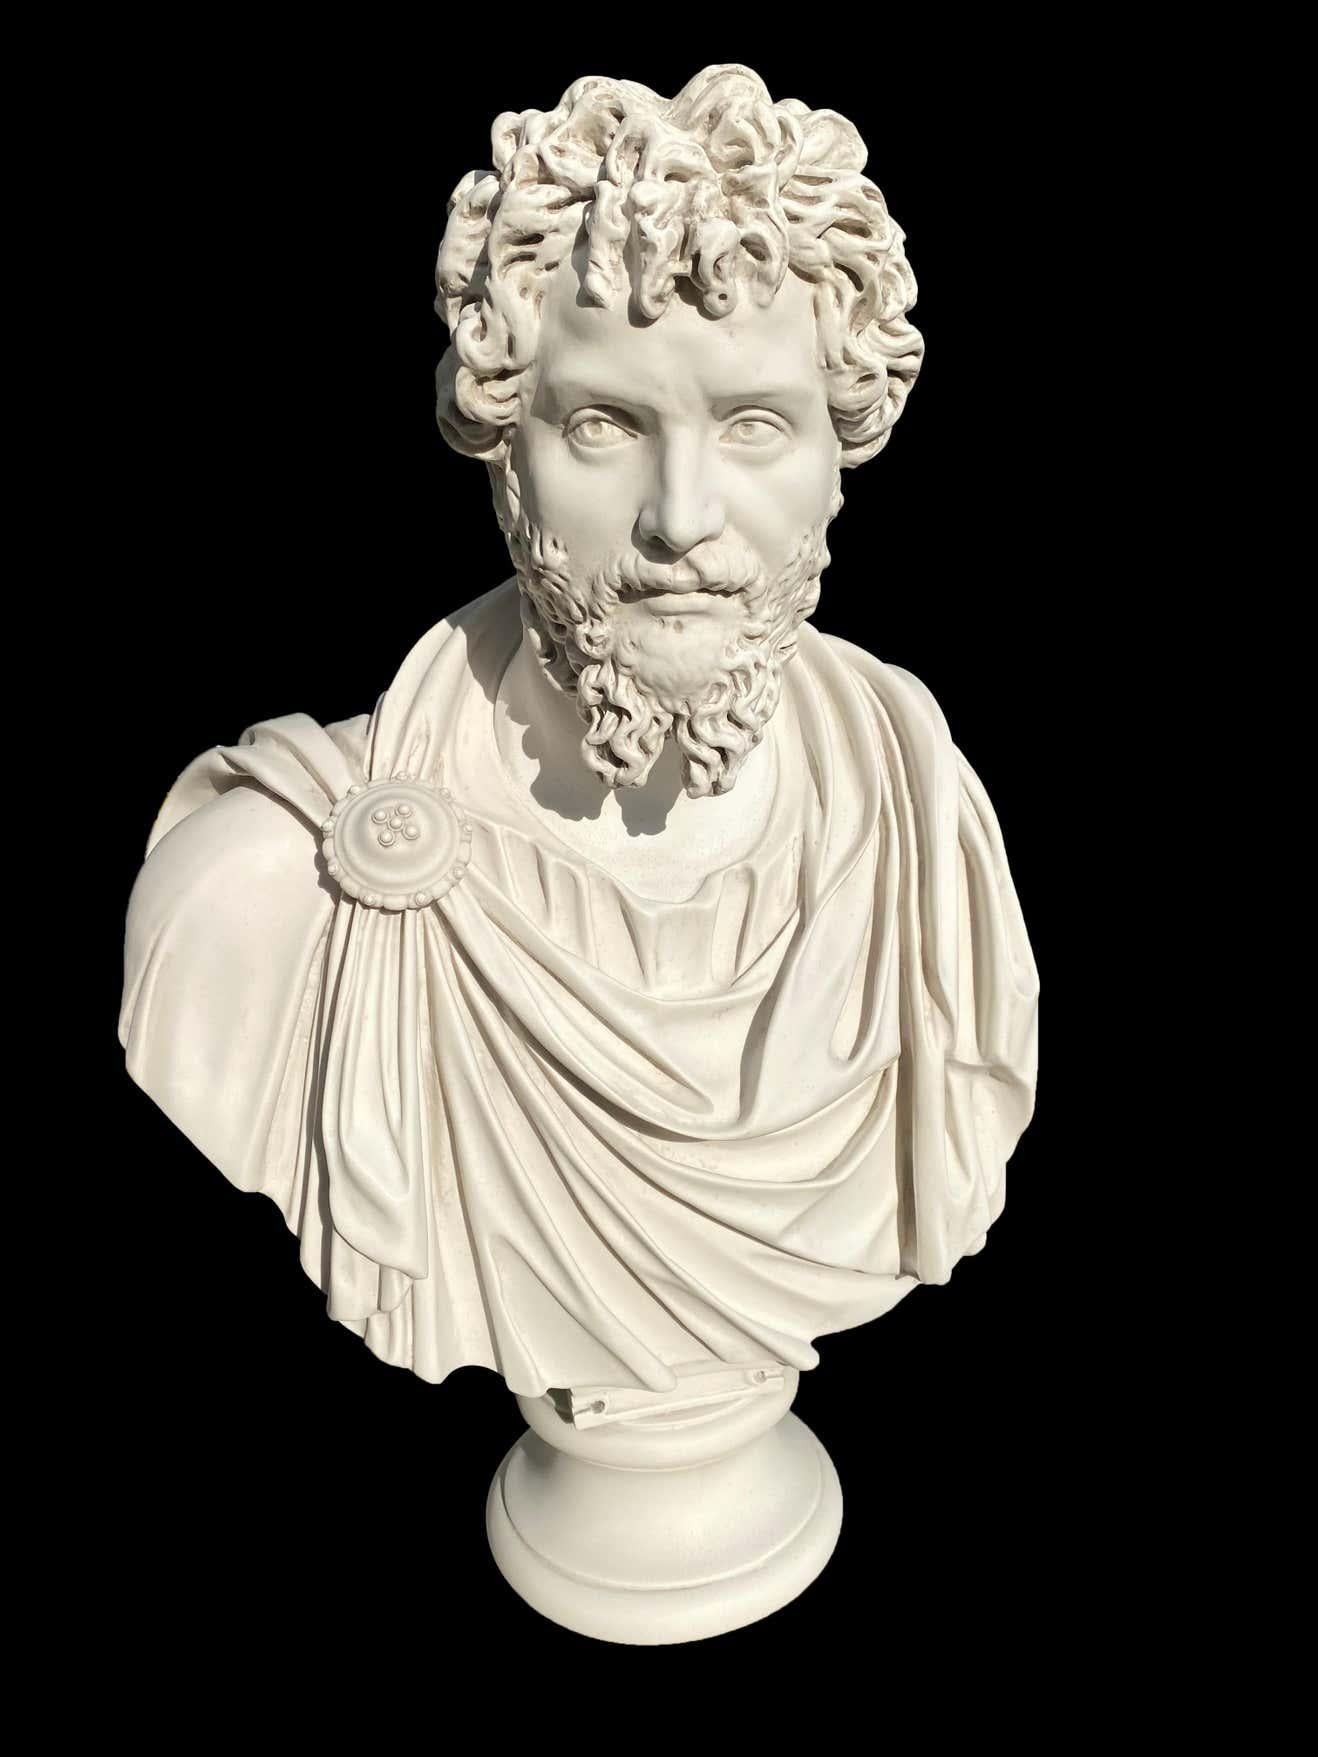 Septimius Severus a bust sculpture with toga drapery, 20th century.

This large library bust is after the marble original in the museum de Capitolini, Rome. This model was also used in the making of the film Gladiator. Septimus Severus was Roman